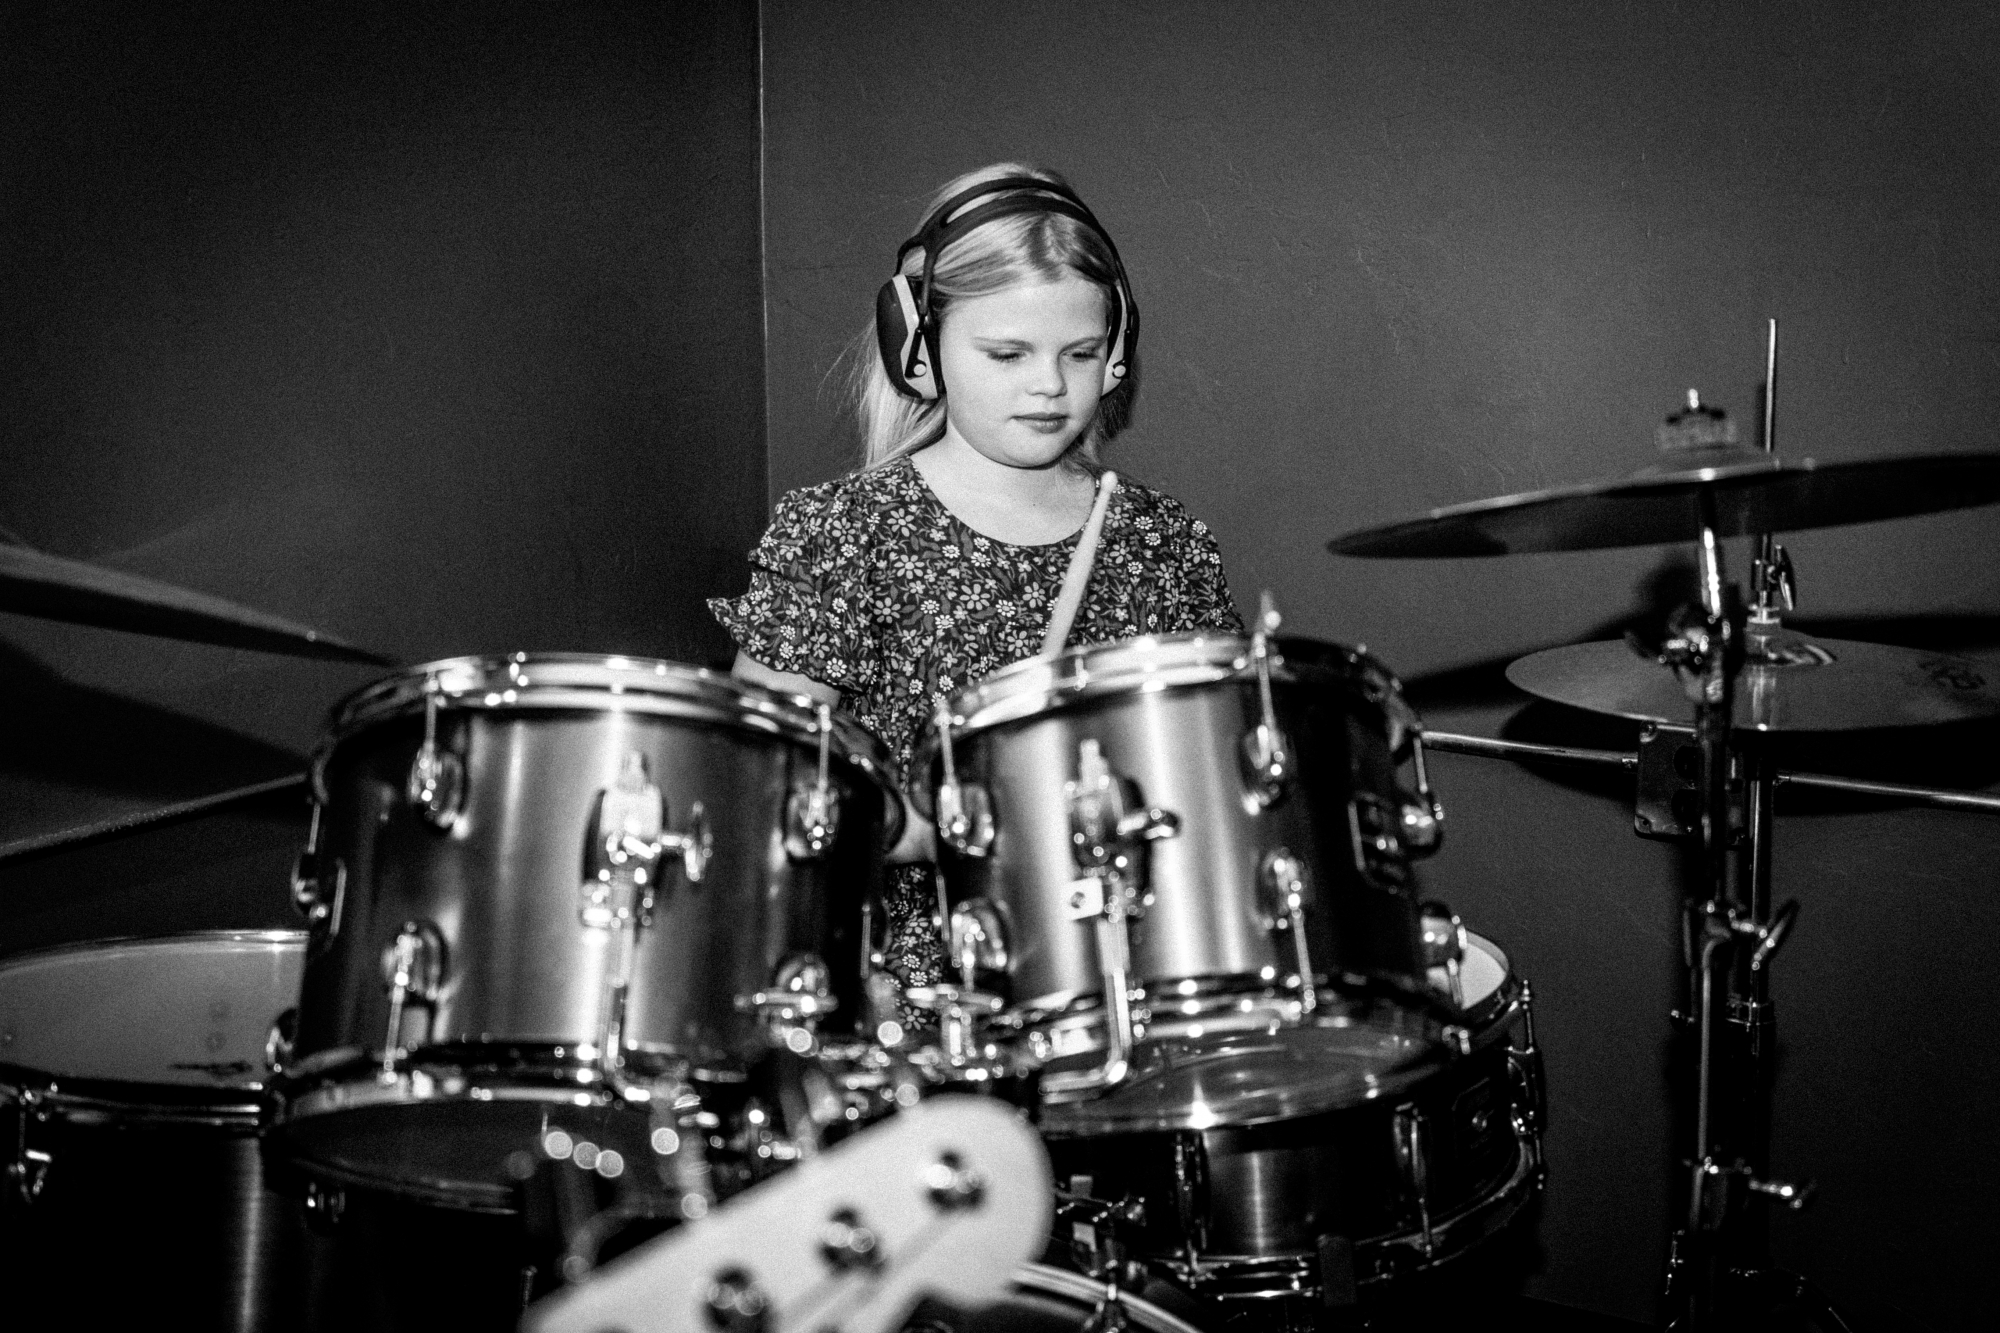 Stella on the drums